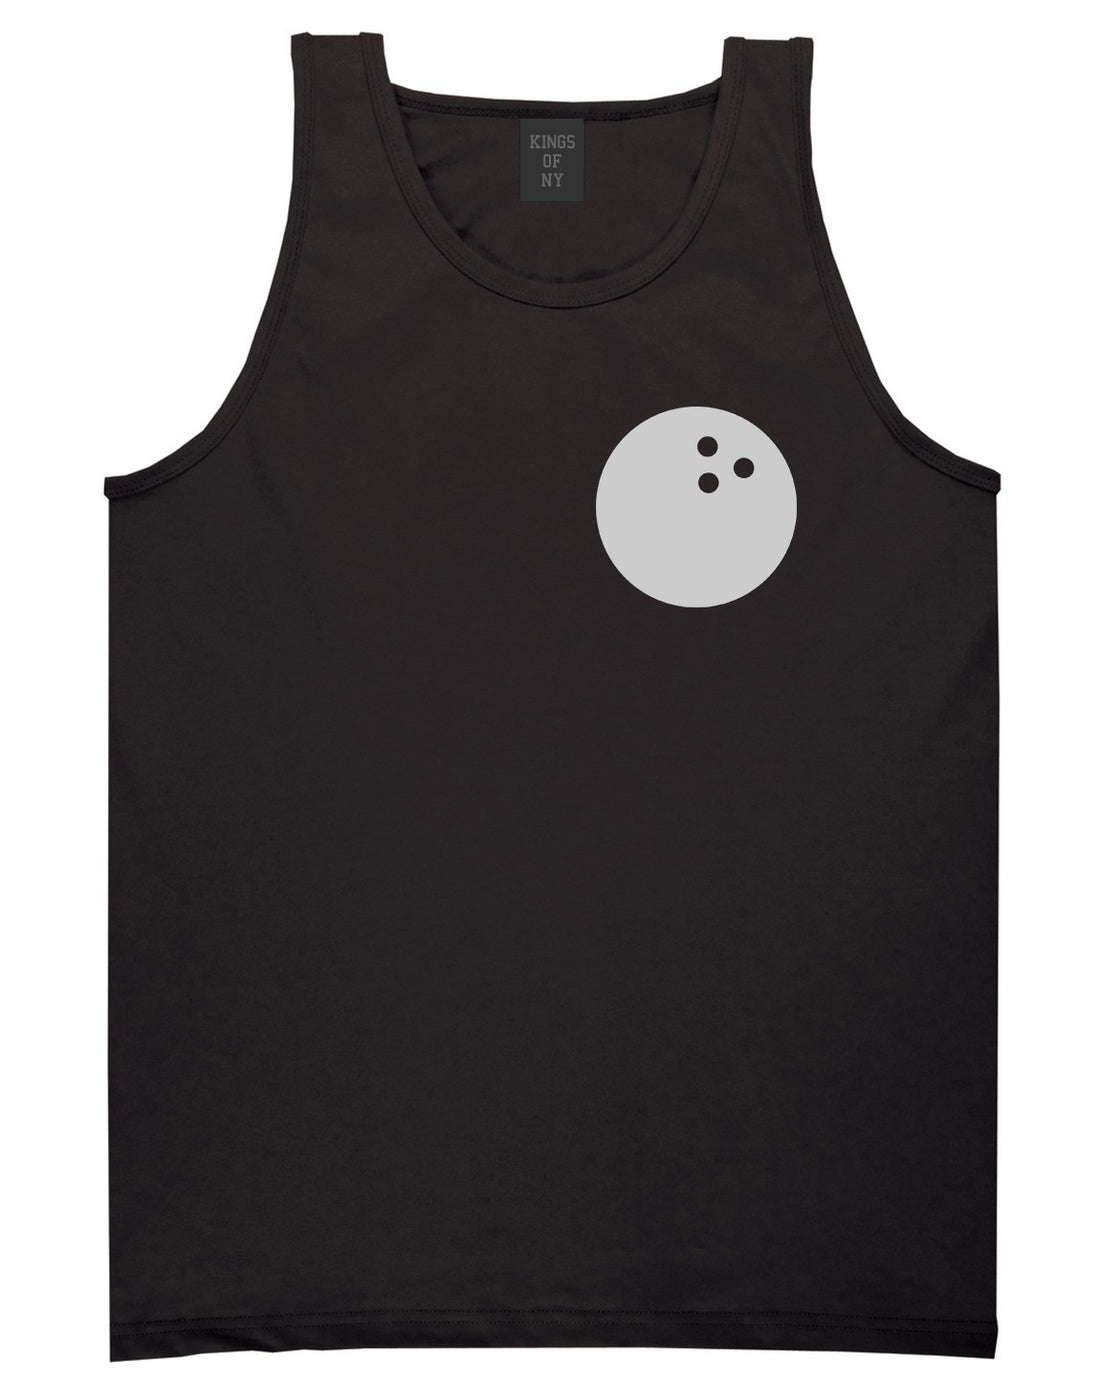 Bowling Ball Chest Black Tank Top Shirt by Kings Of NY